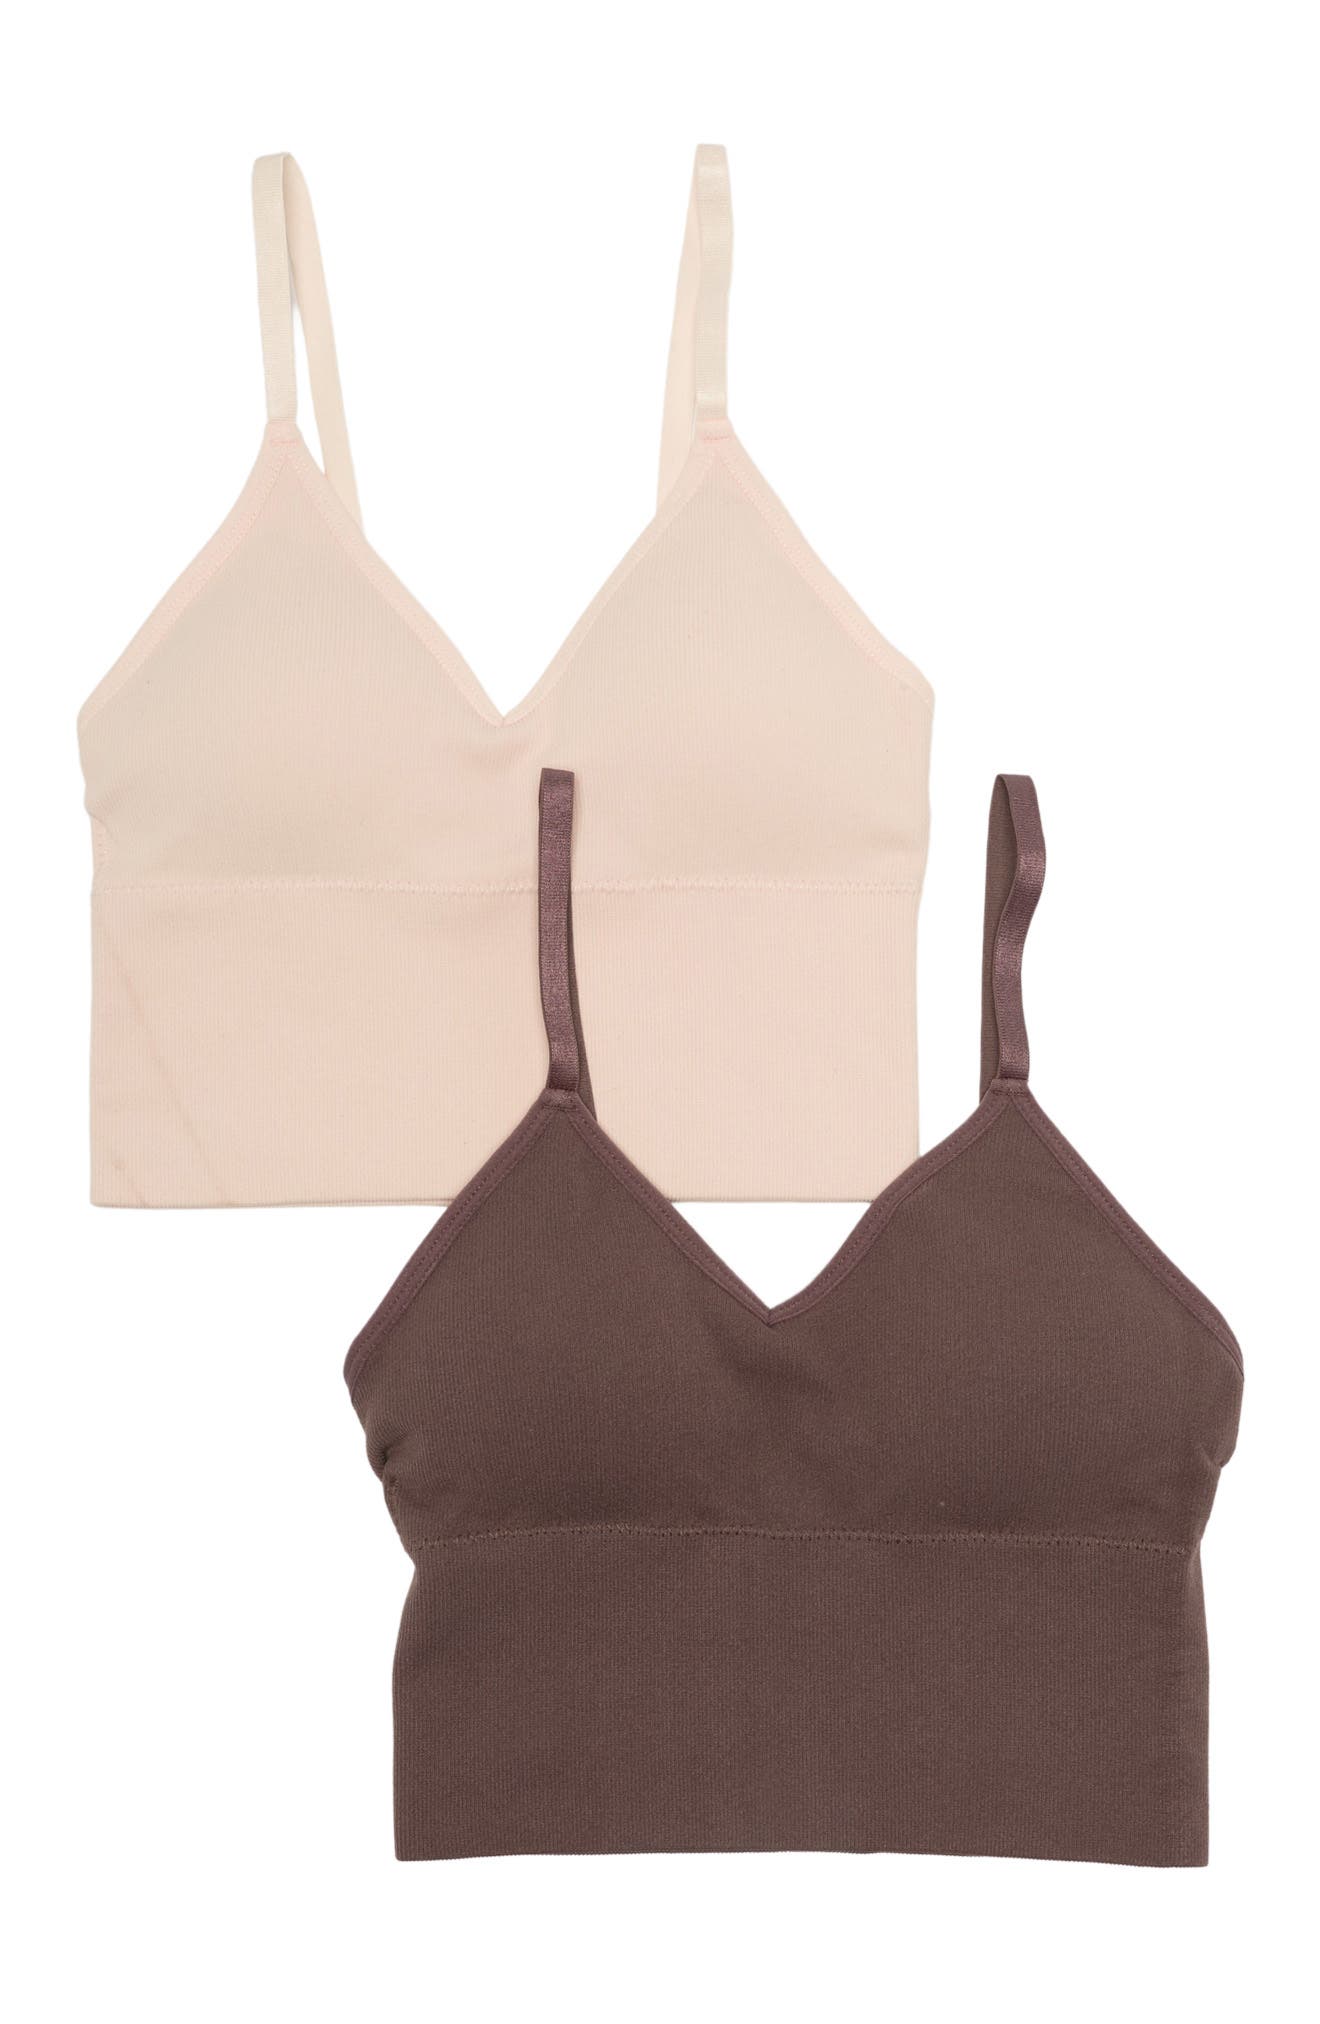 Studio By Capezio Seamless Ribbed Longlined Comfort Bras In Light Pink / Peppercorn